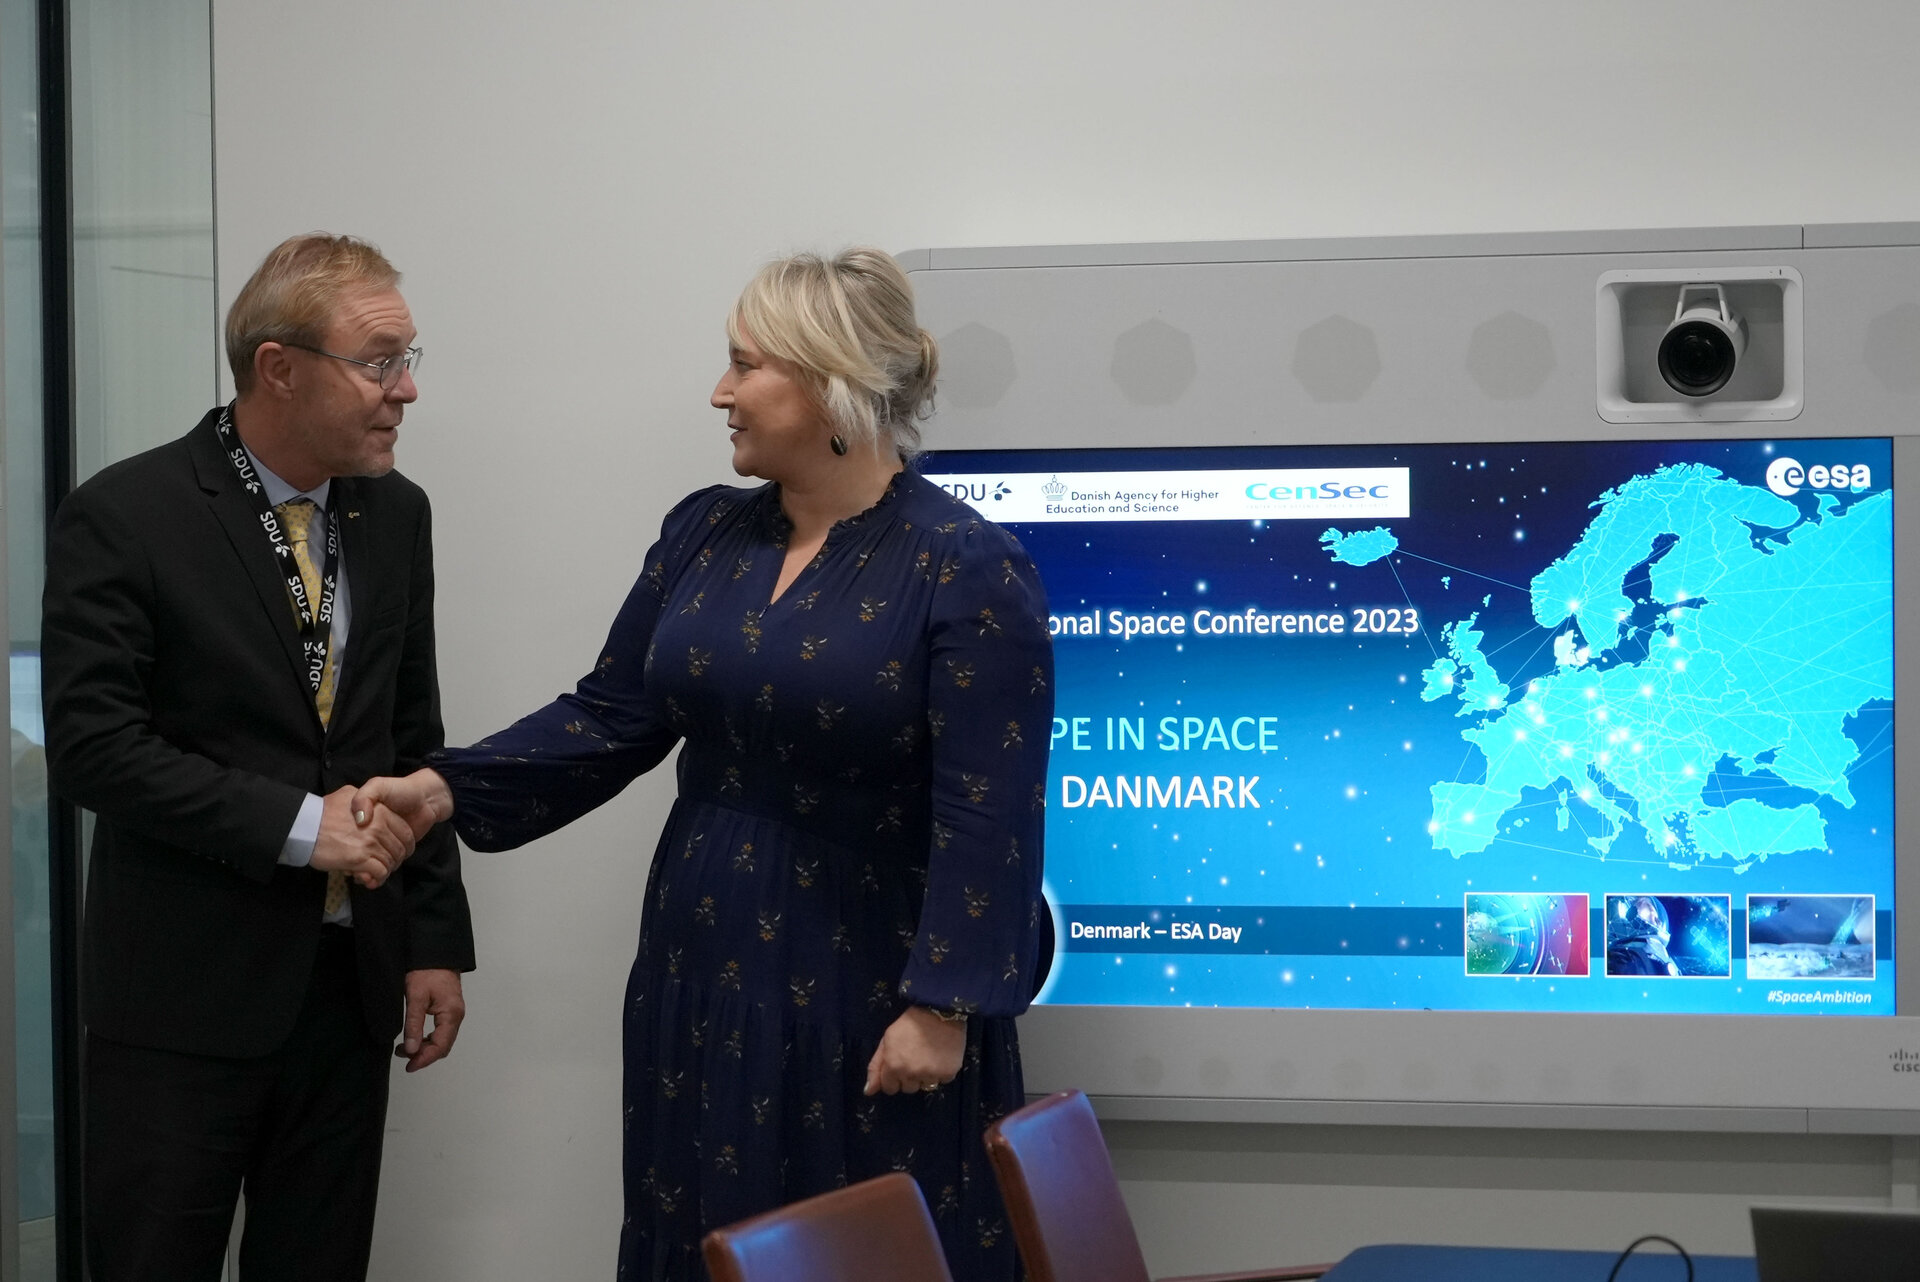 Bilateral meeting. Christina Egelund, Minister of Higher Education and Science of Denmark, and Toni Tolker-Nielsen, Acting Director of Space Transportation in ESA